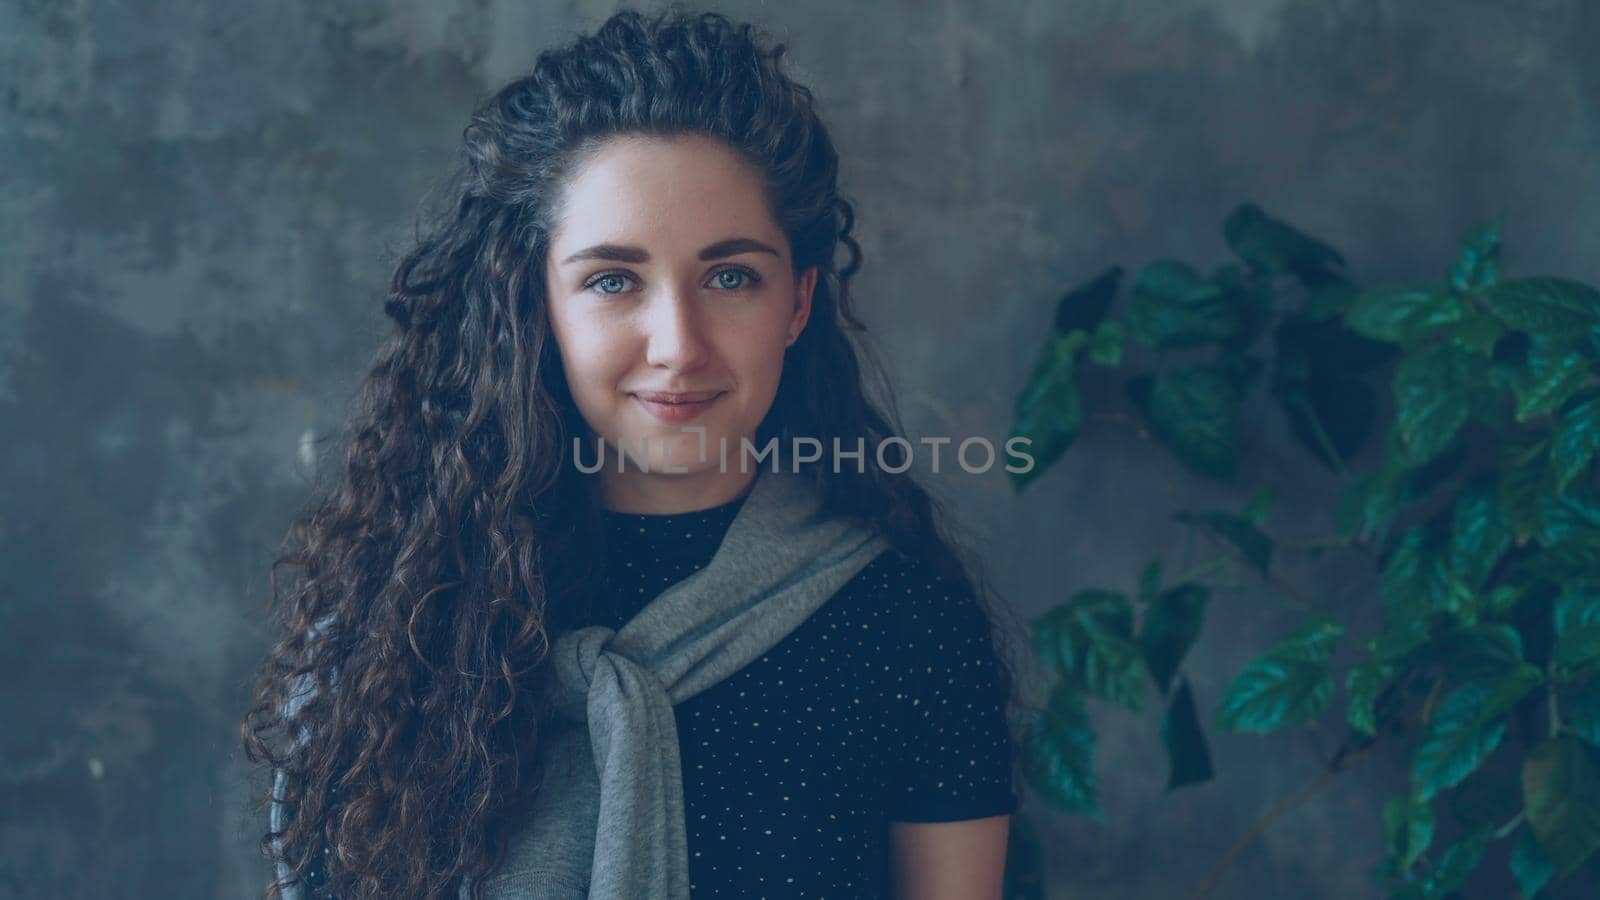 Close-up portrait of yougn attractive girl looking into camera and smiling while standing against grey wall and large green plant indoors